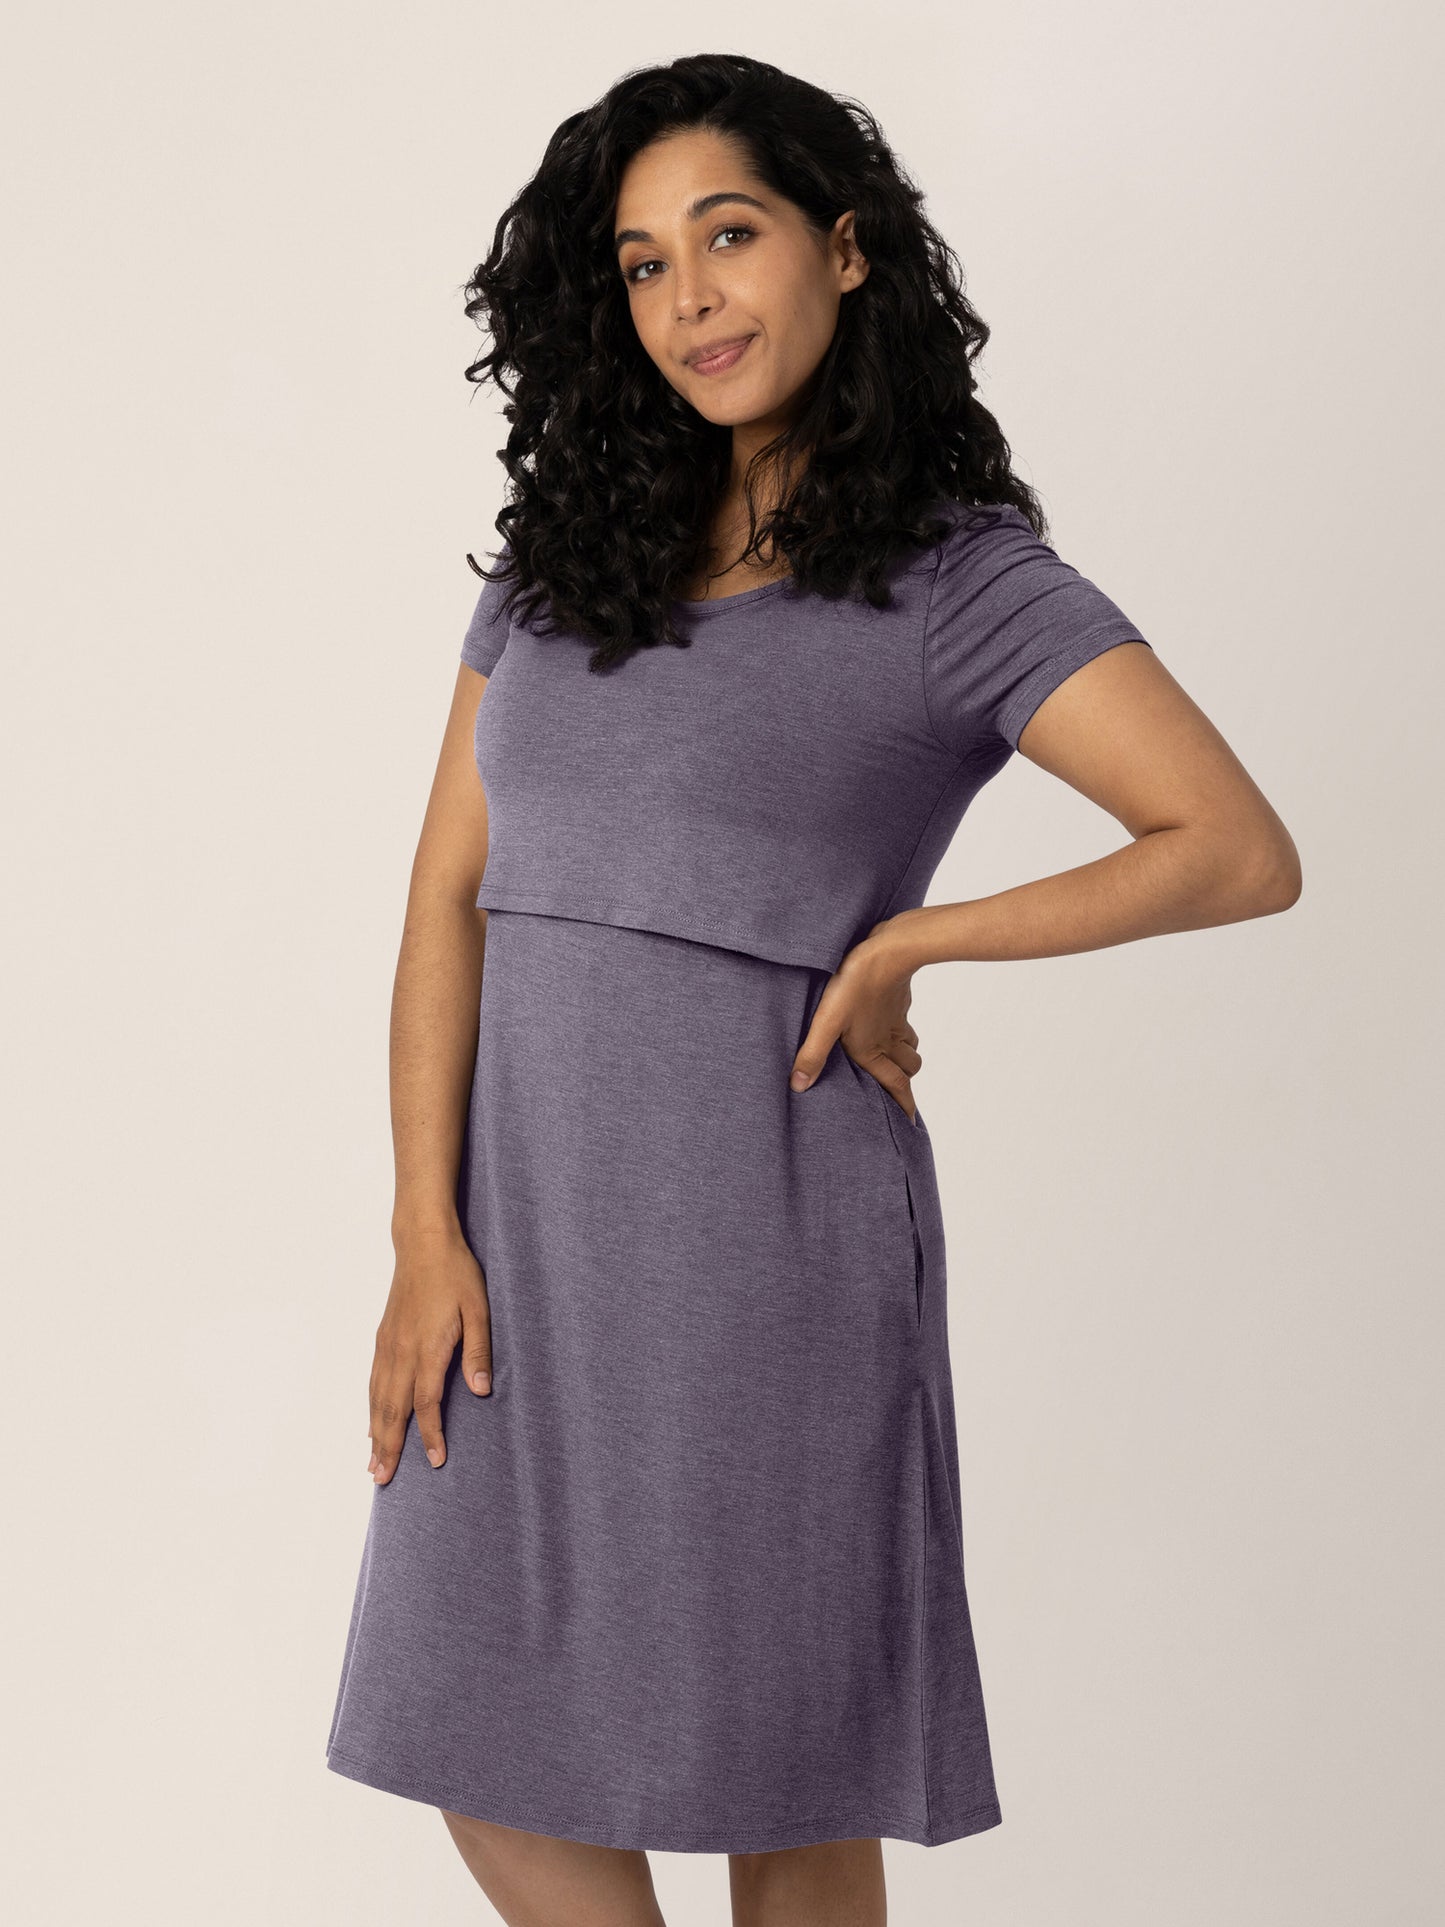 Model wearing the Eleanora Bamboo Maternity & Nursing Dress in Heathered Granite with her hand on her hip.